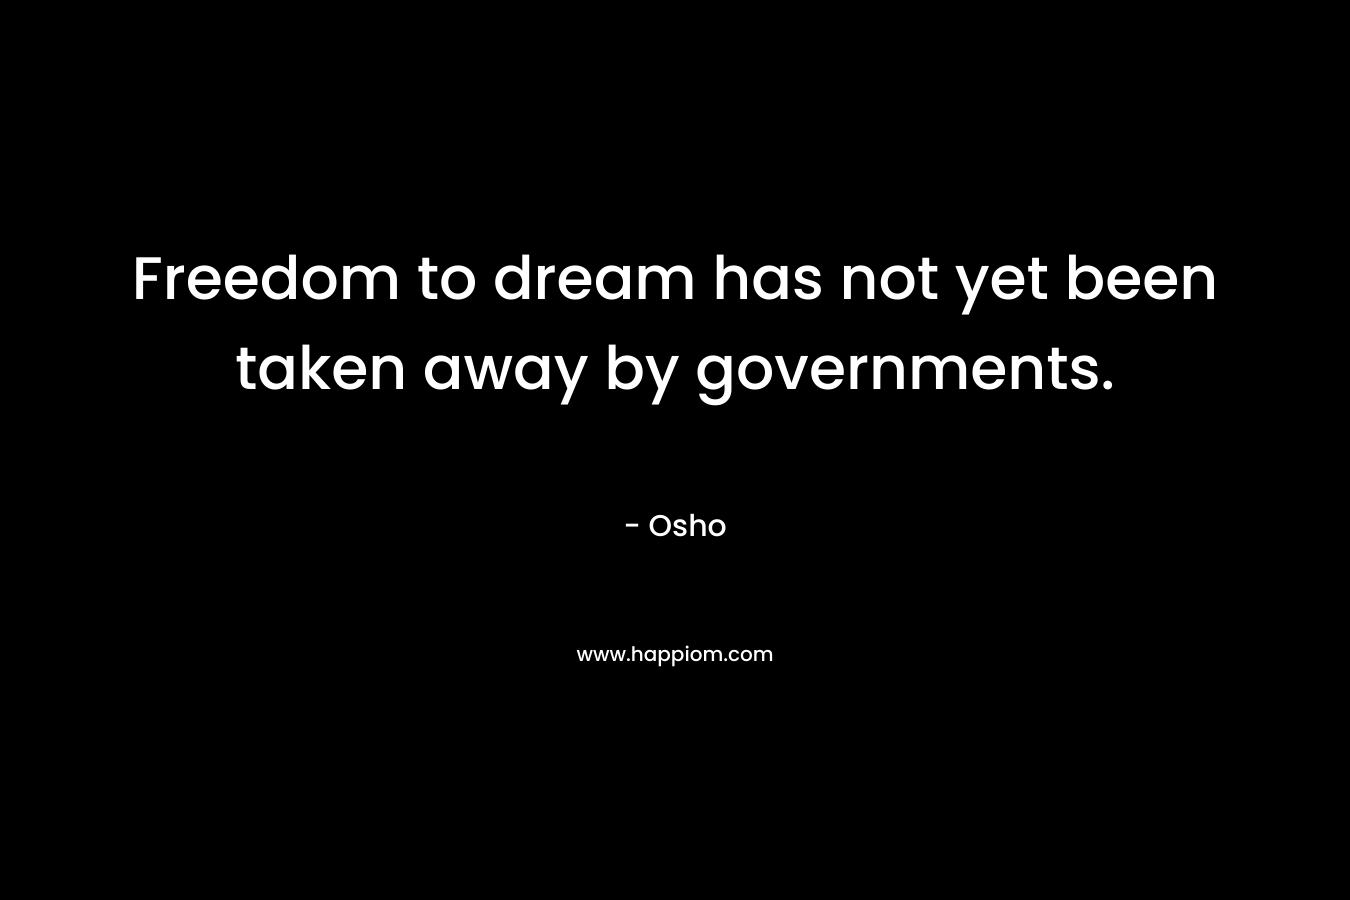 Freedom to dream has not yet been taken away by governments.